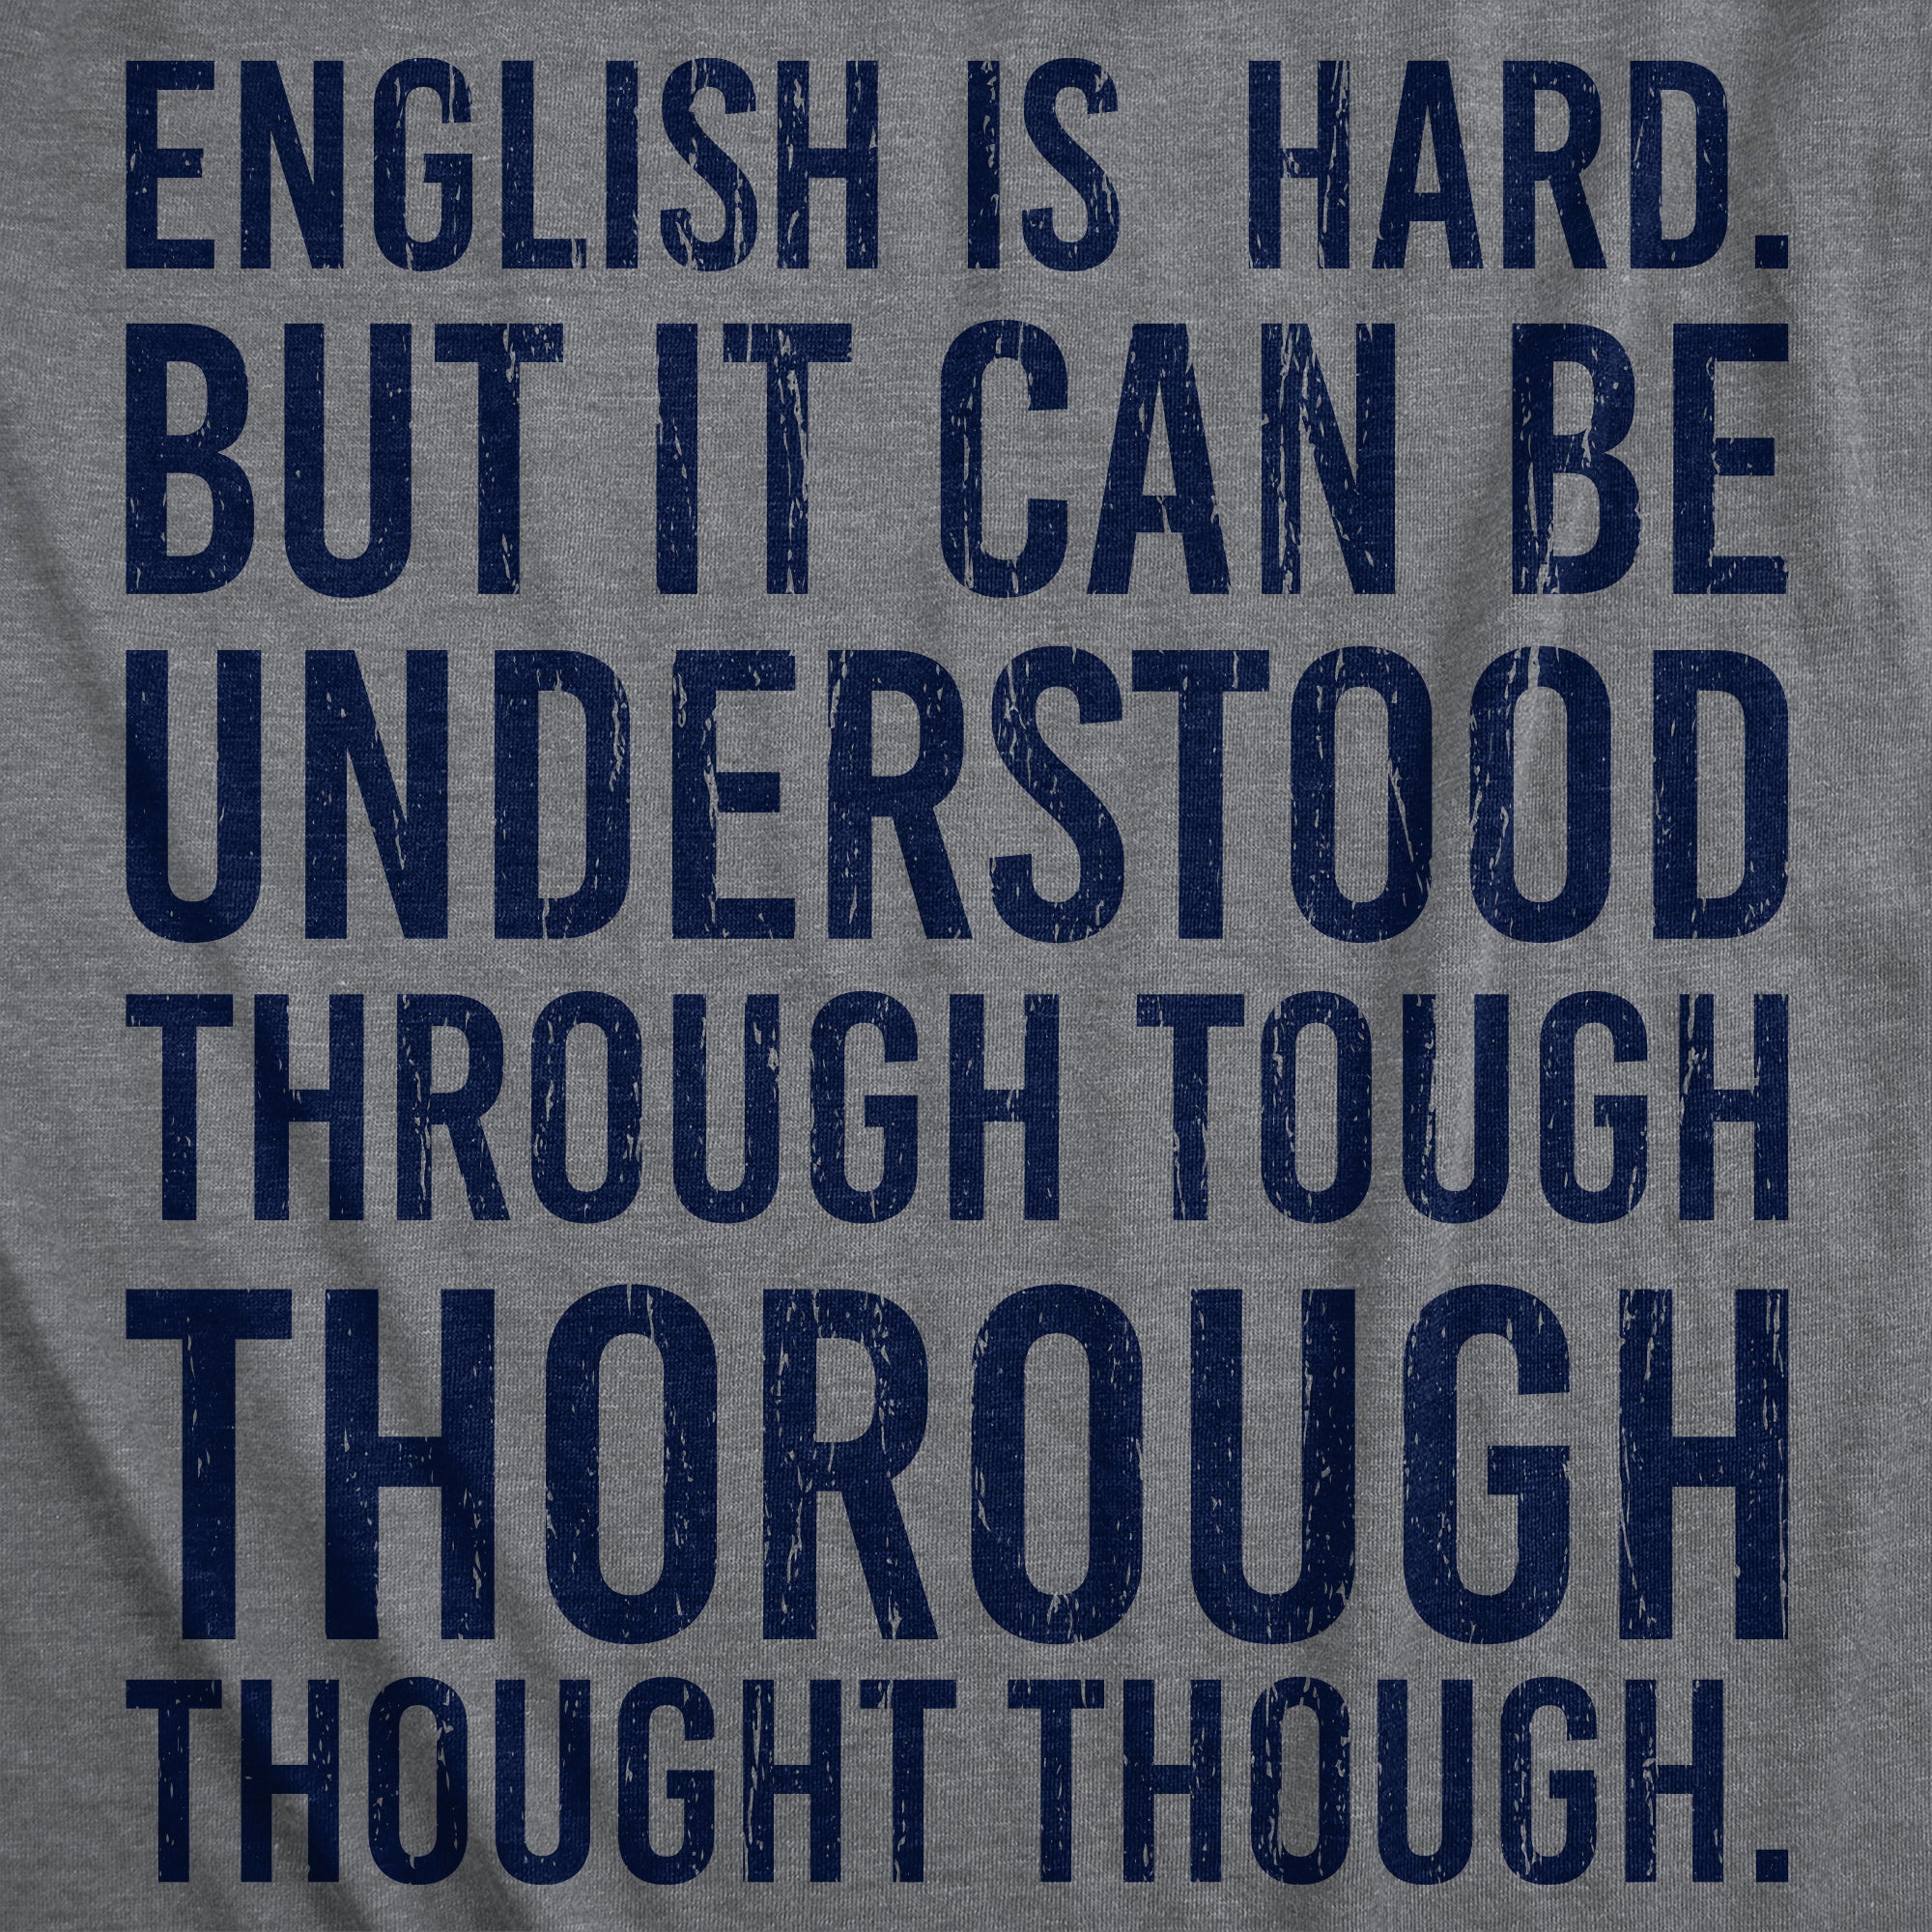 Funny Dark Heather Grey - English Is Hard English Is Hard But It Can Be Understood Through Tough Thorough Thought Though Womens T Shirt Nerdy sarcastic Tee